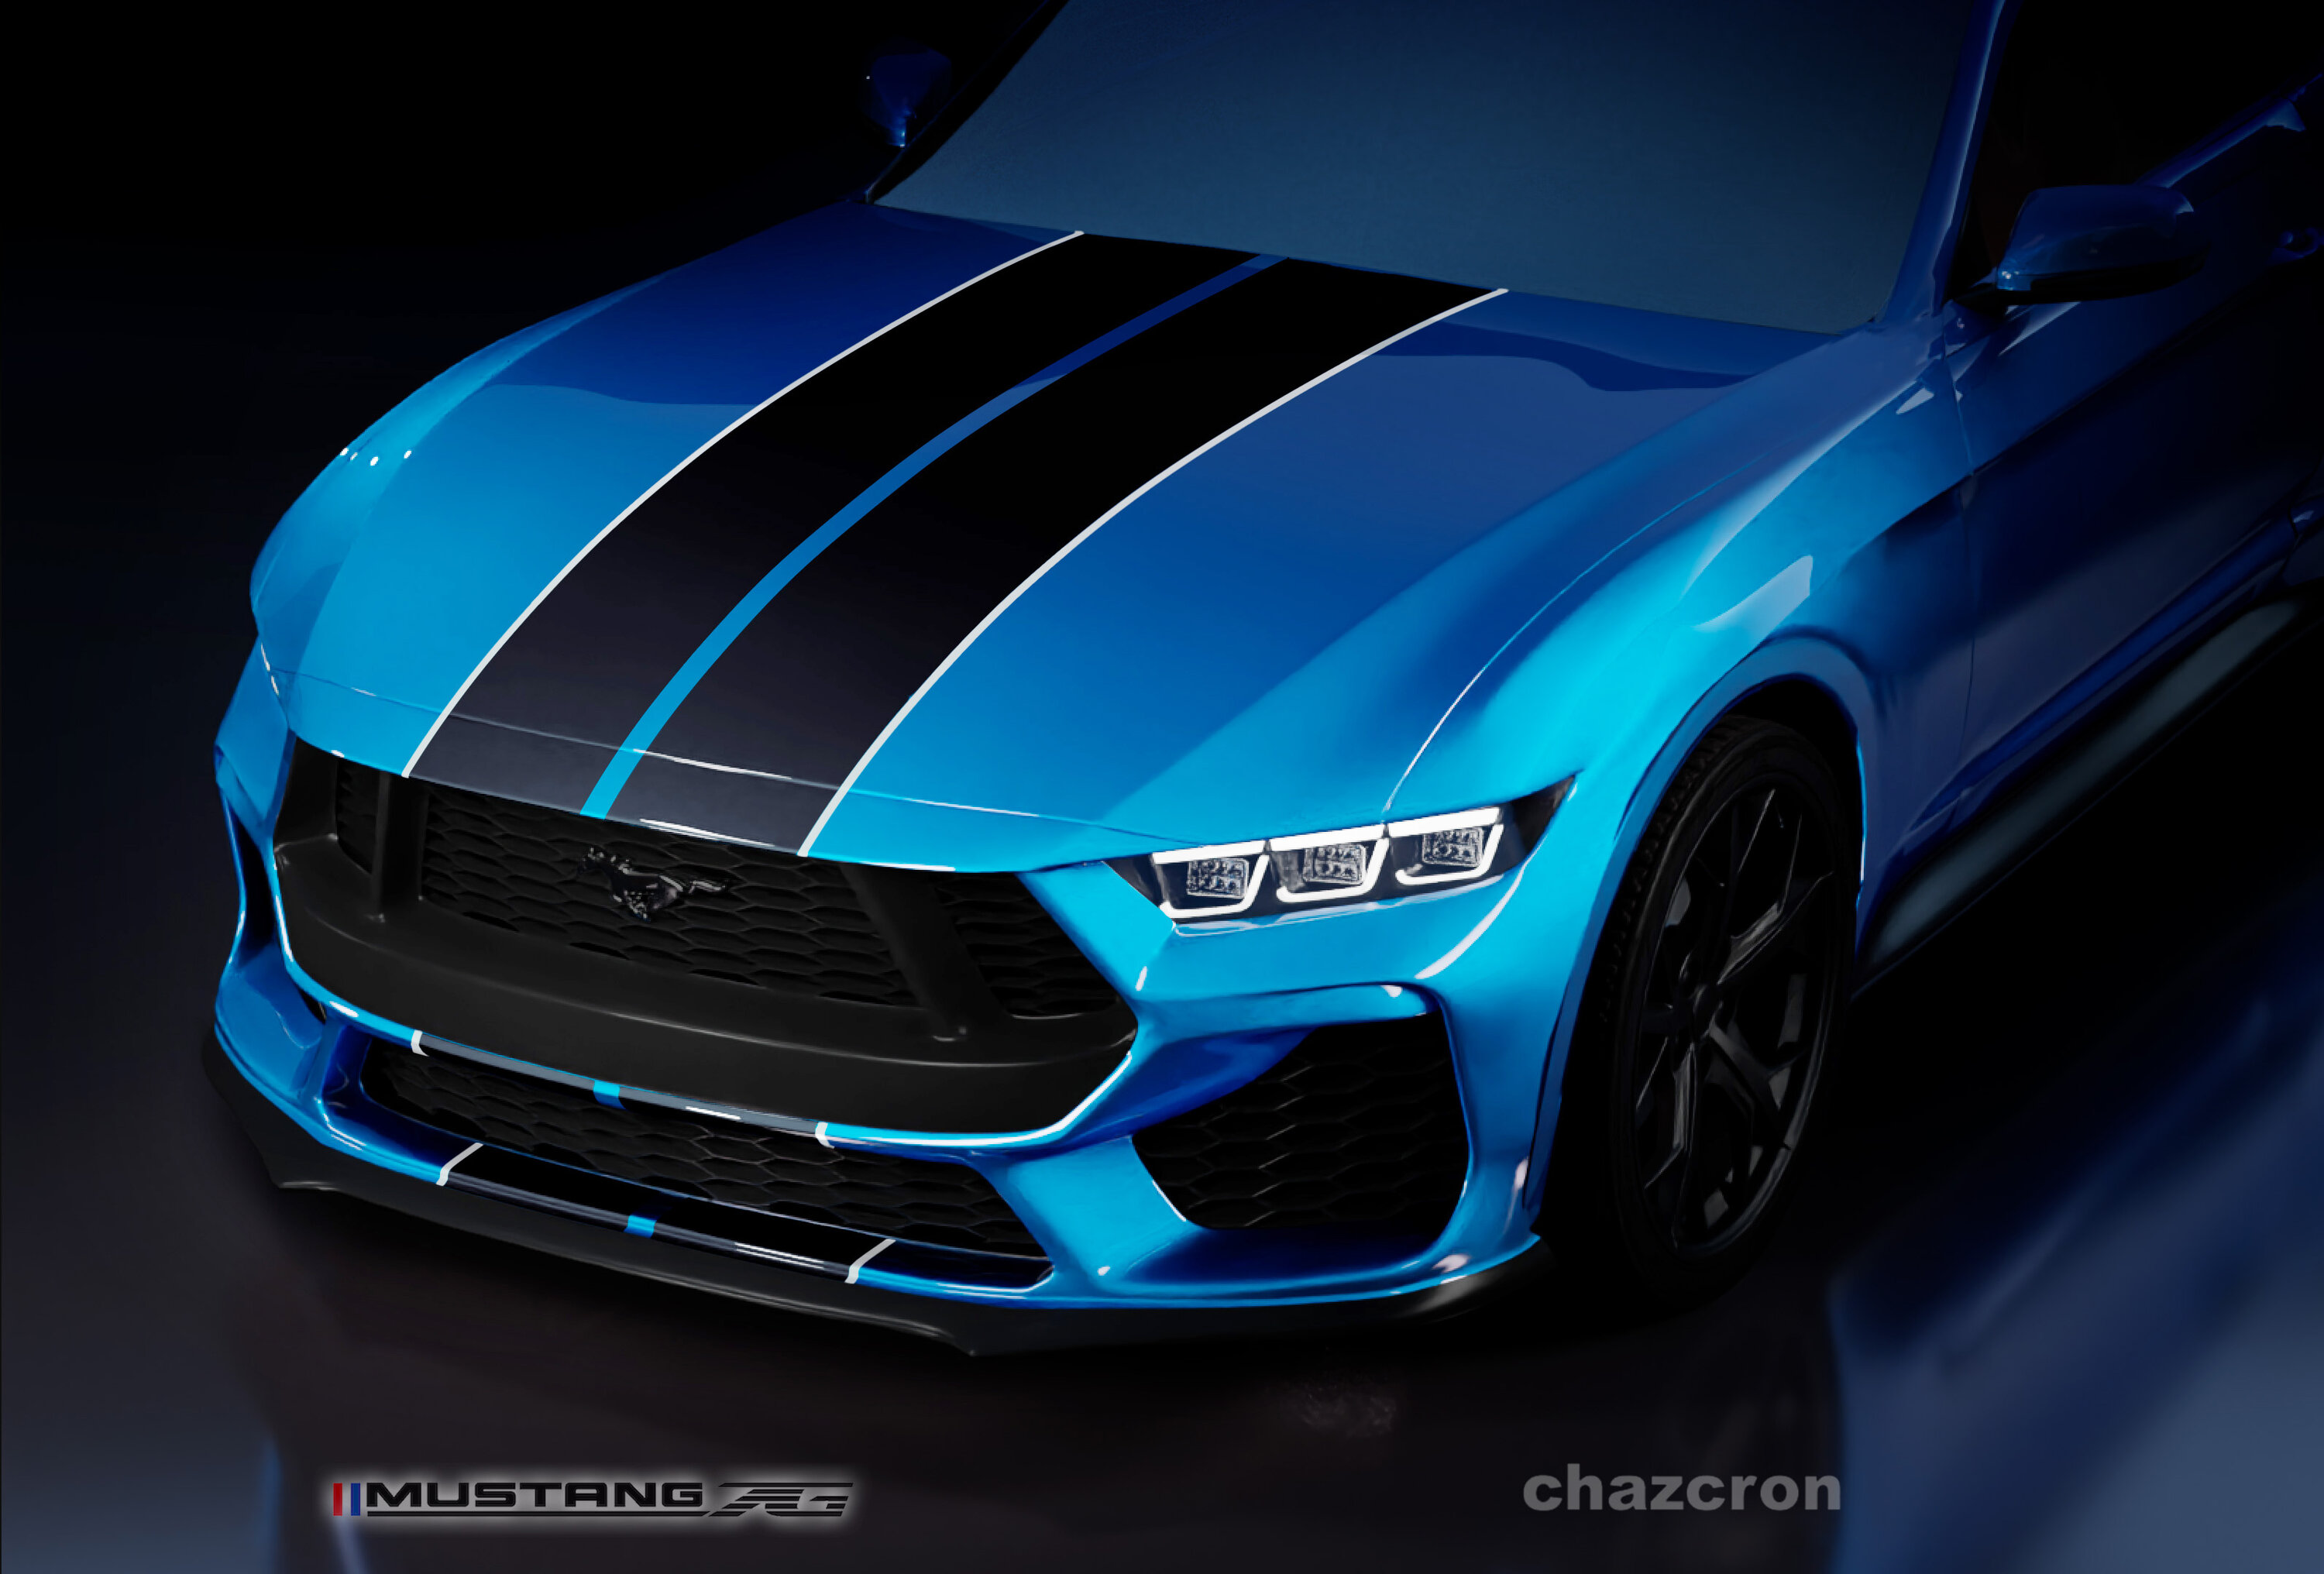 S650 Mustang chazcron weighs in... 7th gen 2023 Mustang S650 3D model & renderings in several colors! GB_BW